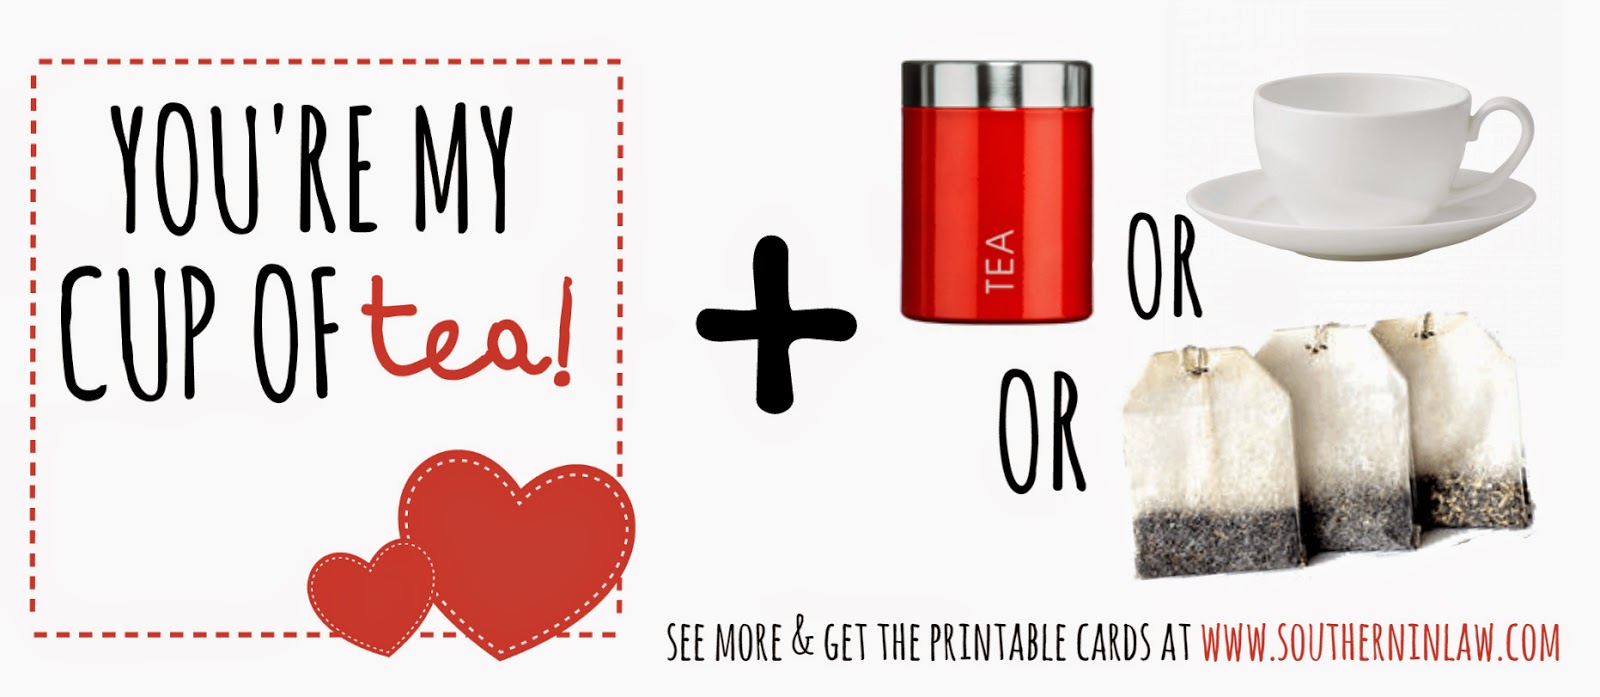 You're my cup of tea - valentines gift idea for tea lovers - Punny Valentines Gift Ideas Free Printable Valentines Cards